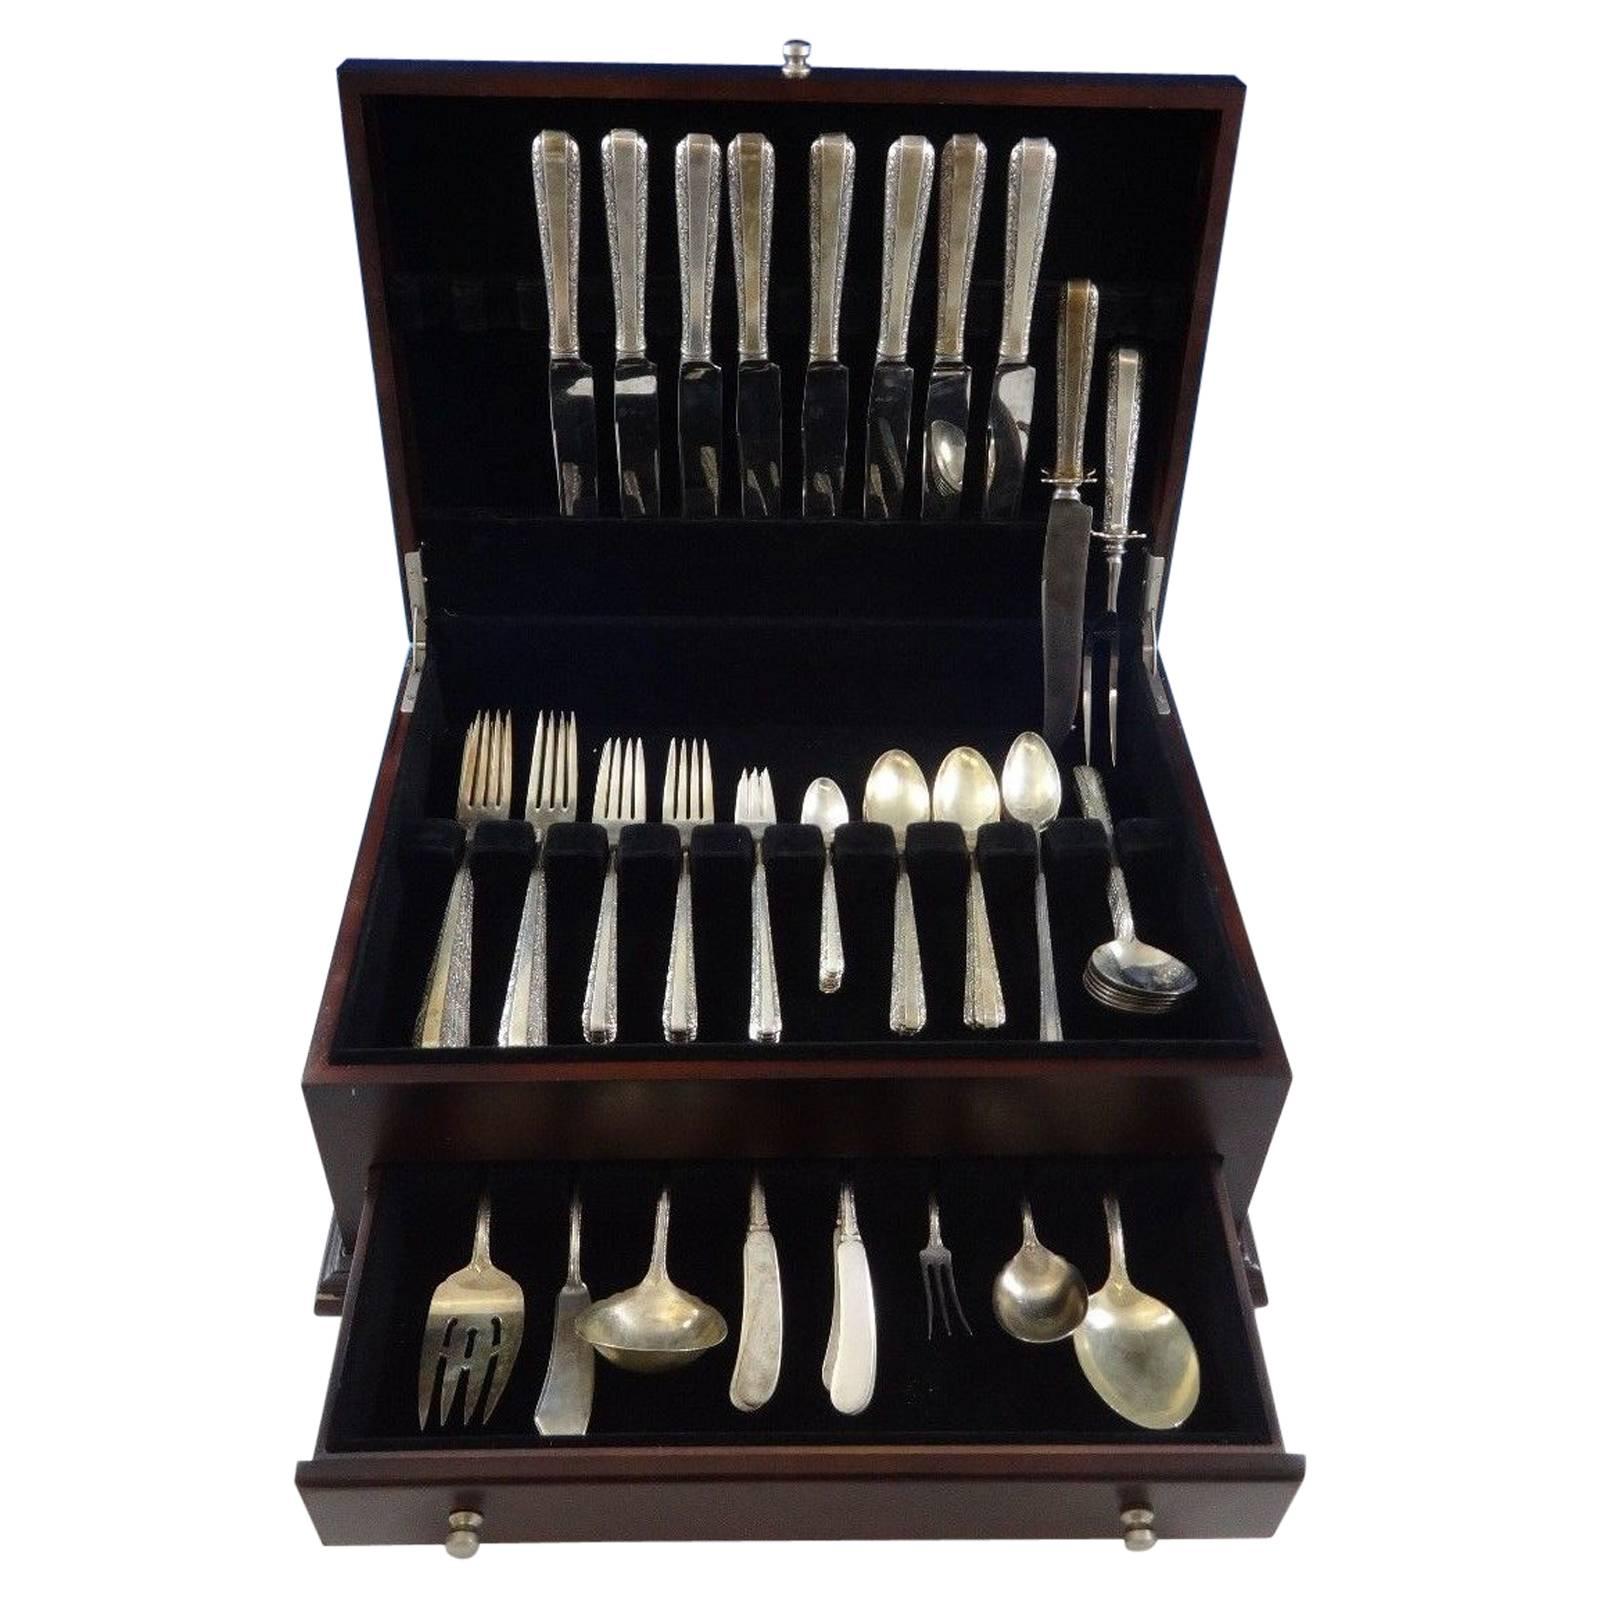 Candlelight by Towle sterling silver dinner size flatware set, 80 pieces. This set includes: 

Eight dinner size knives, 9 5/8